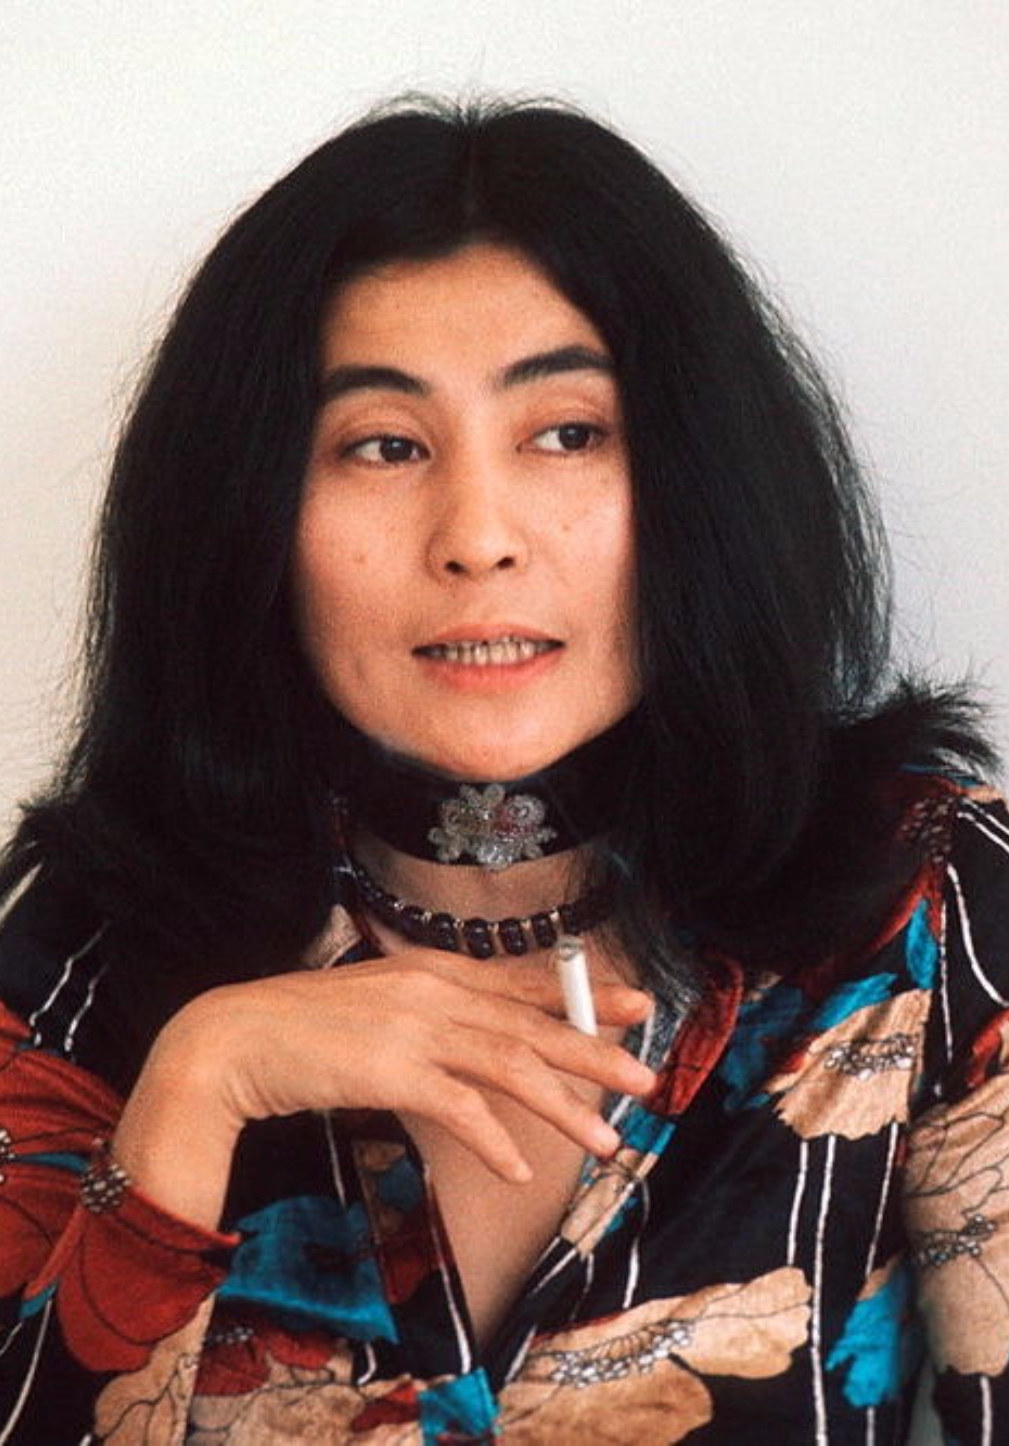 Ono posing for a portrait in 1973